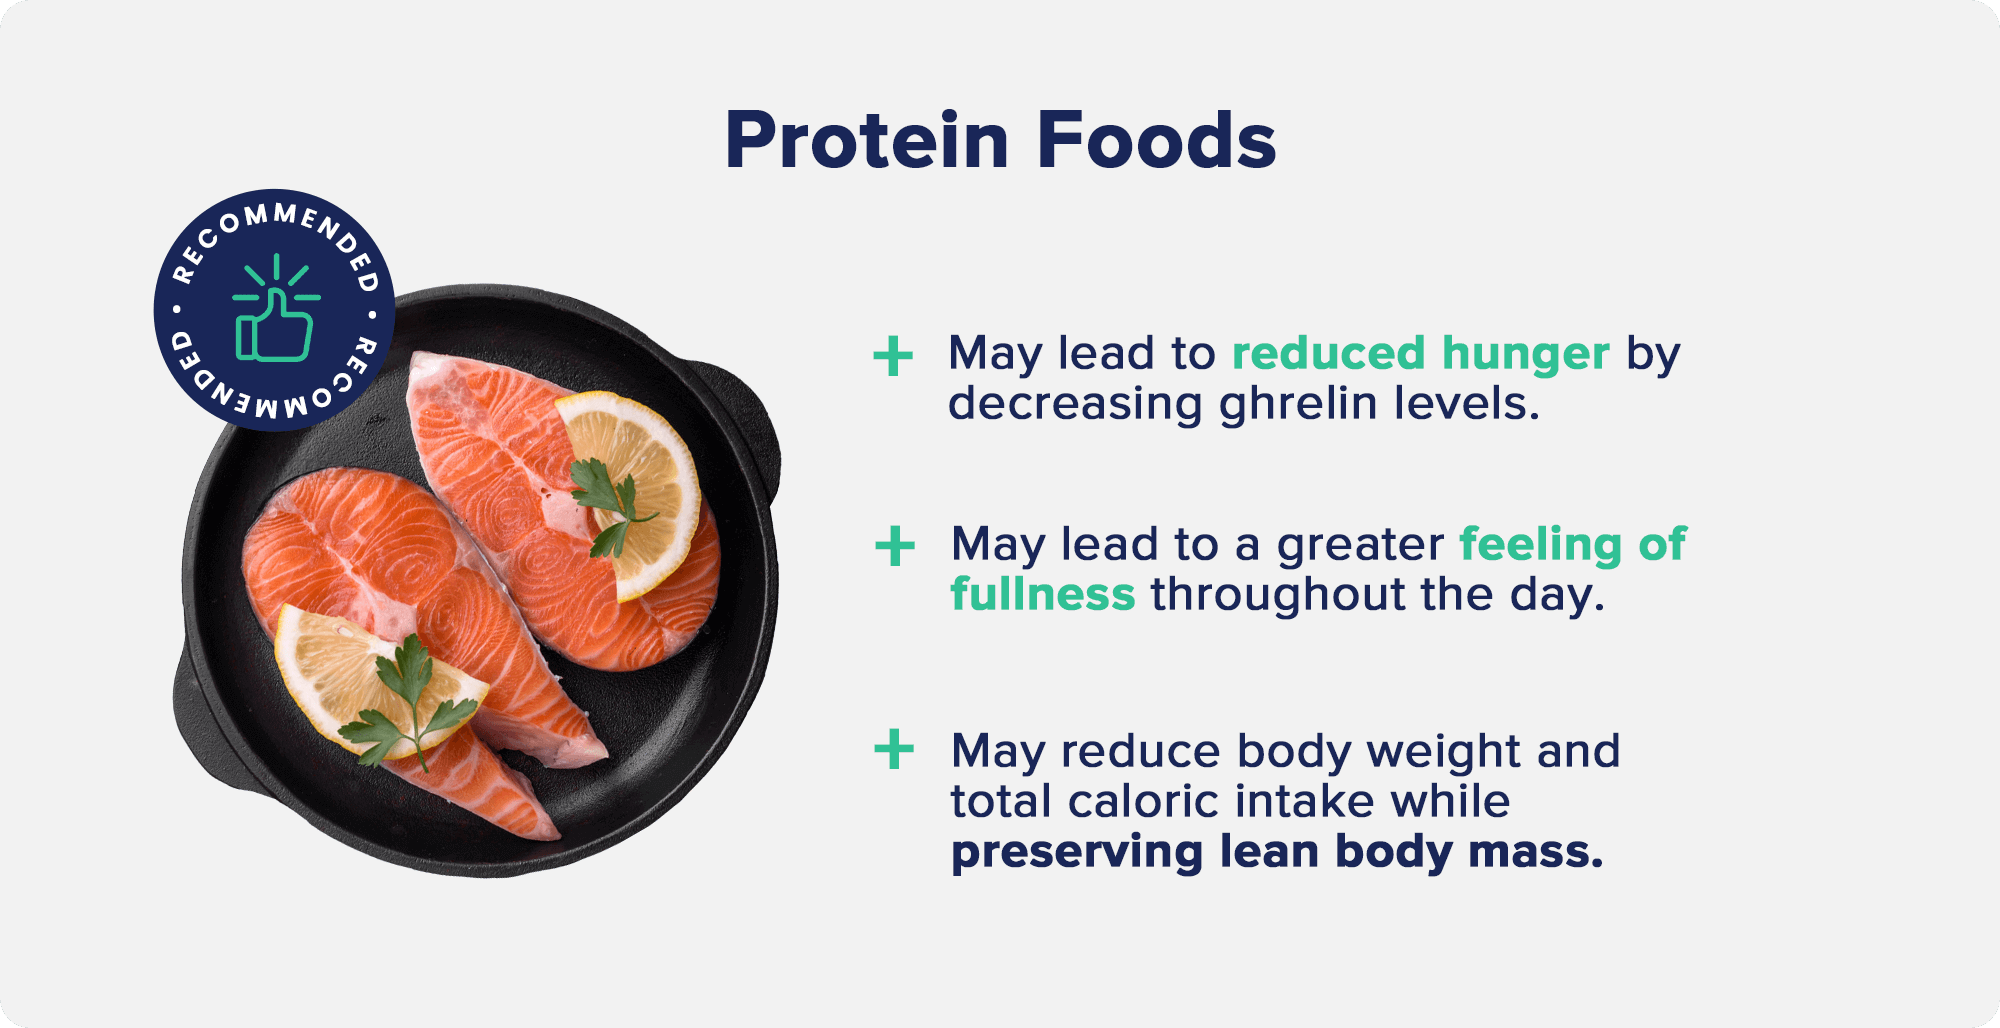 Protein foods